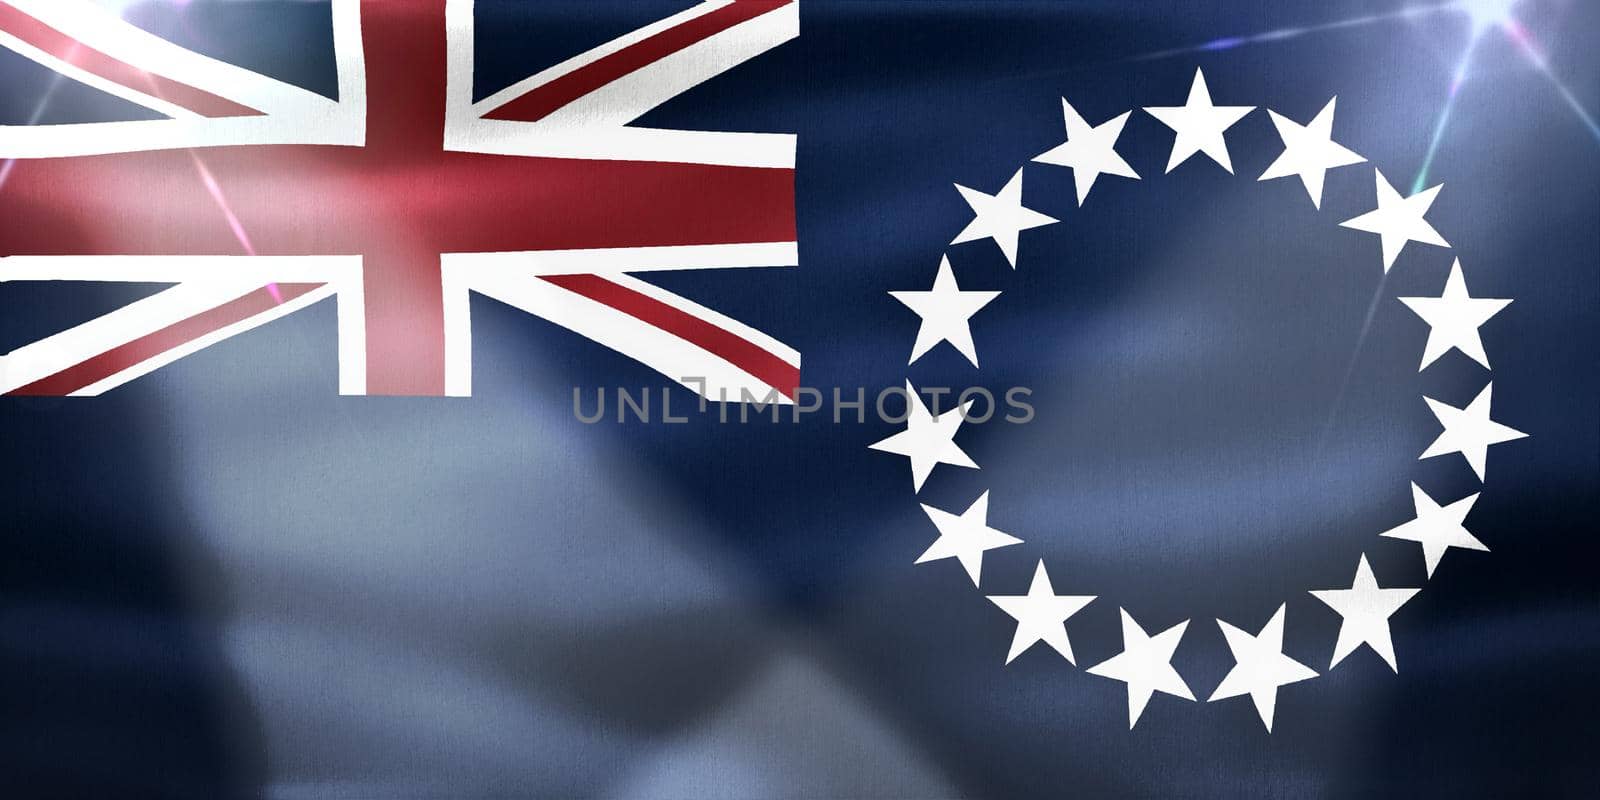 Cook Islands flag - realistic waving fabric flag by MP_foto71